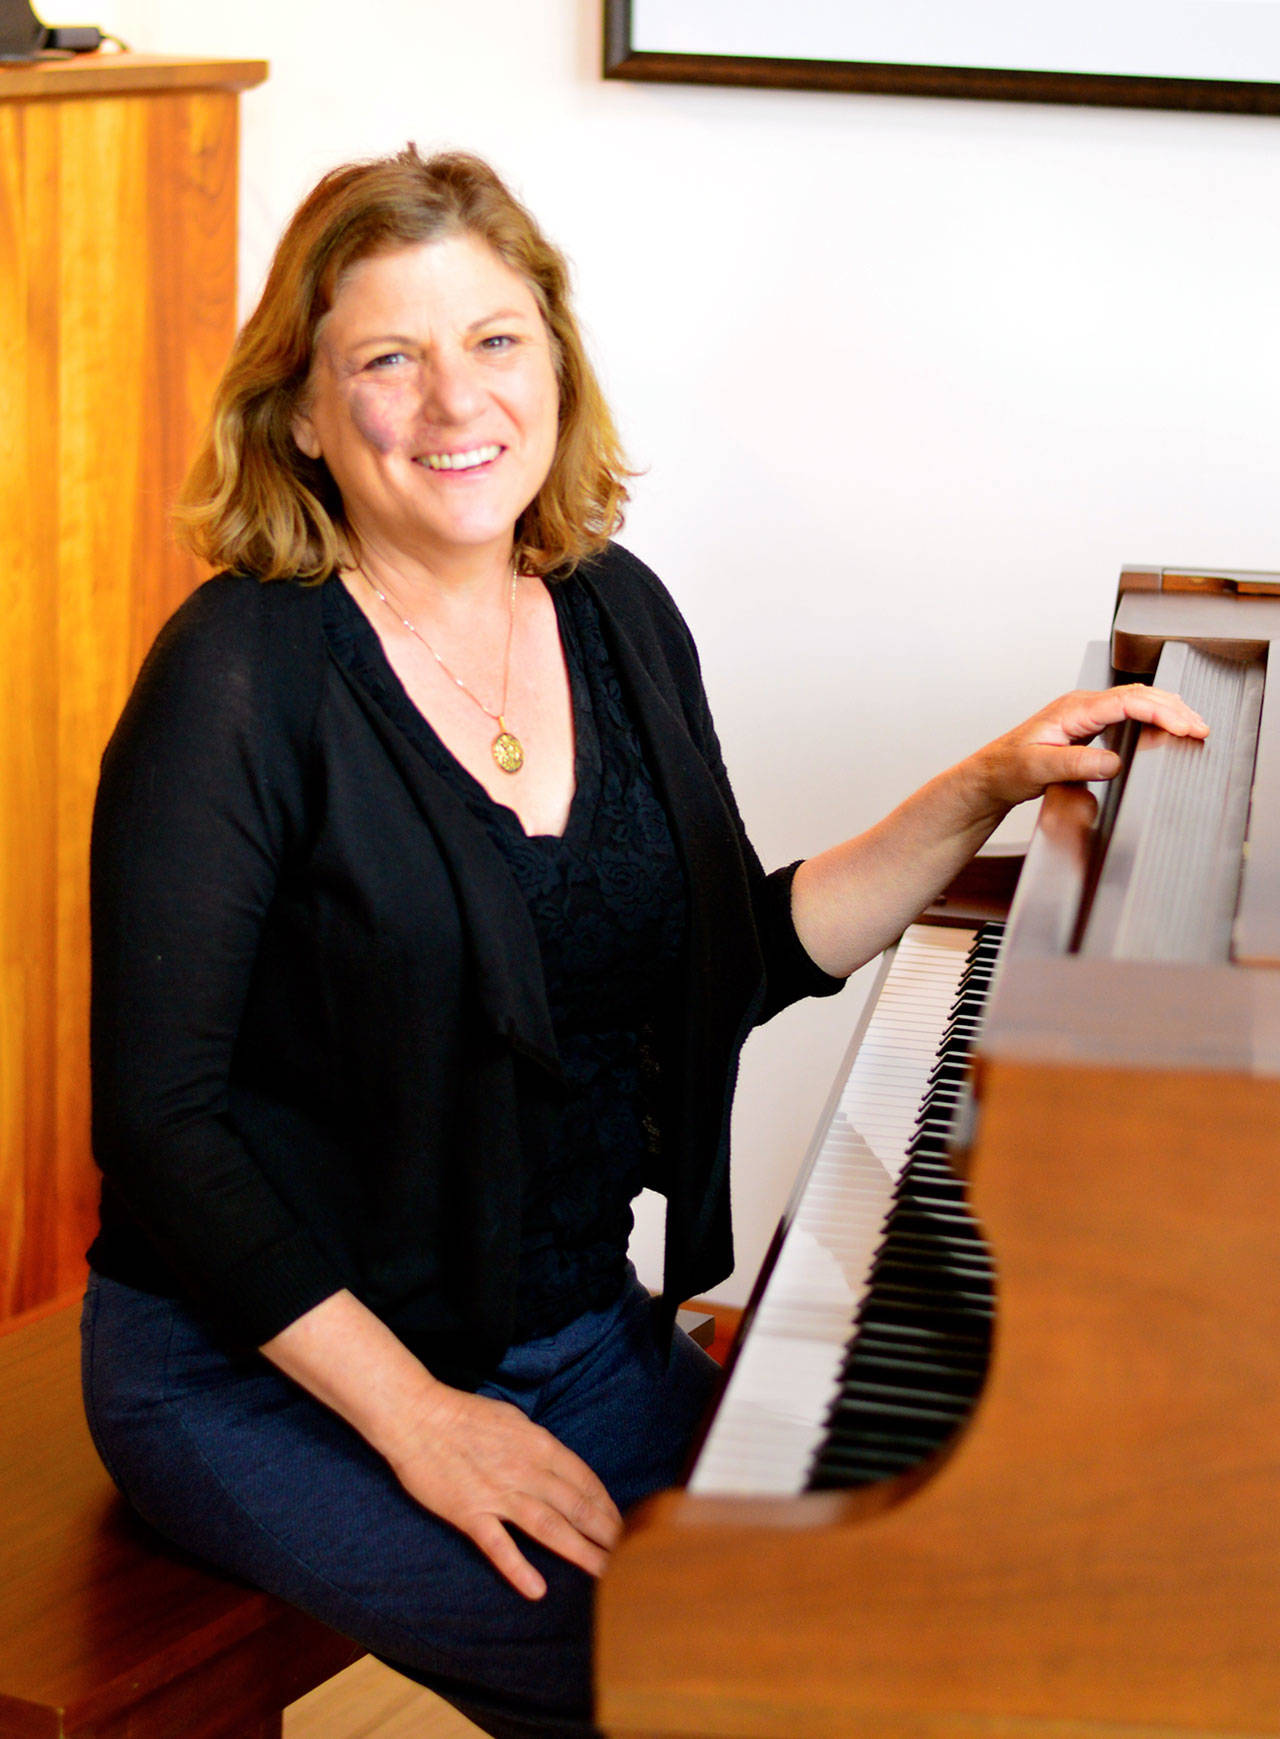 Port Townsend pianist Lisa Lanza is guest soloist with the Port Angeles Chamber Orchestra in two concerts this week.